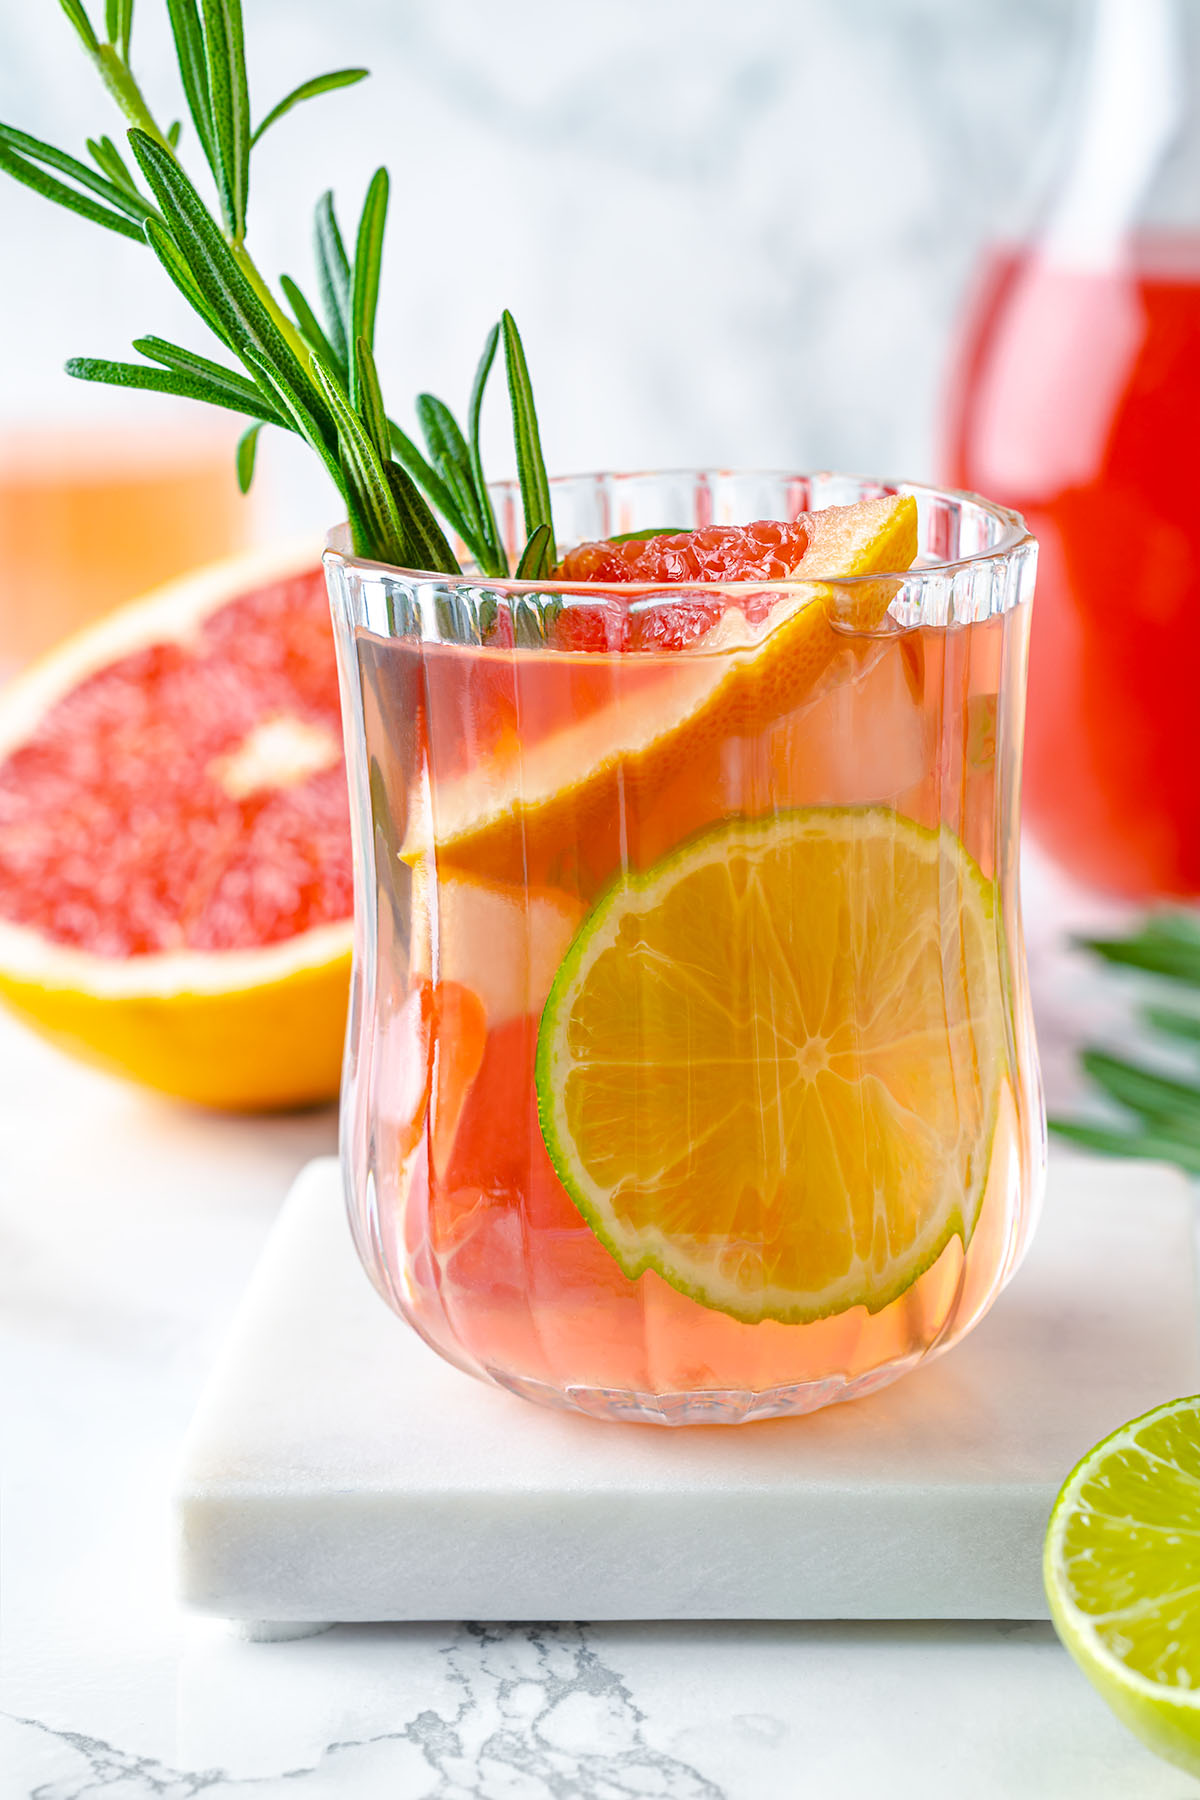 Rosemary grapefruit lime drink in a glass